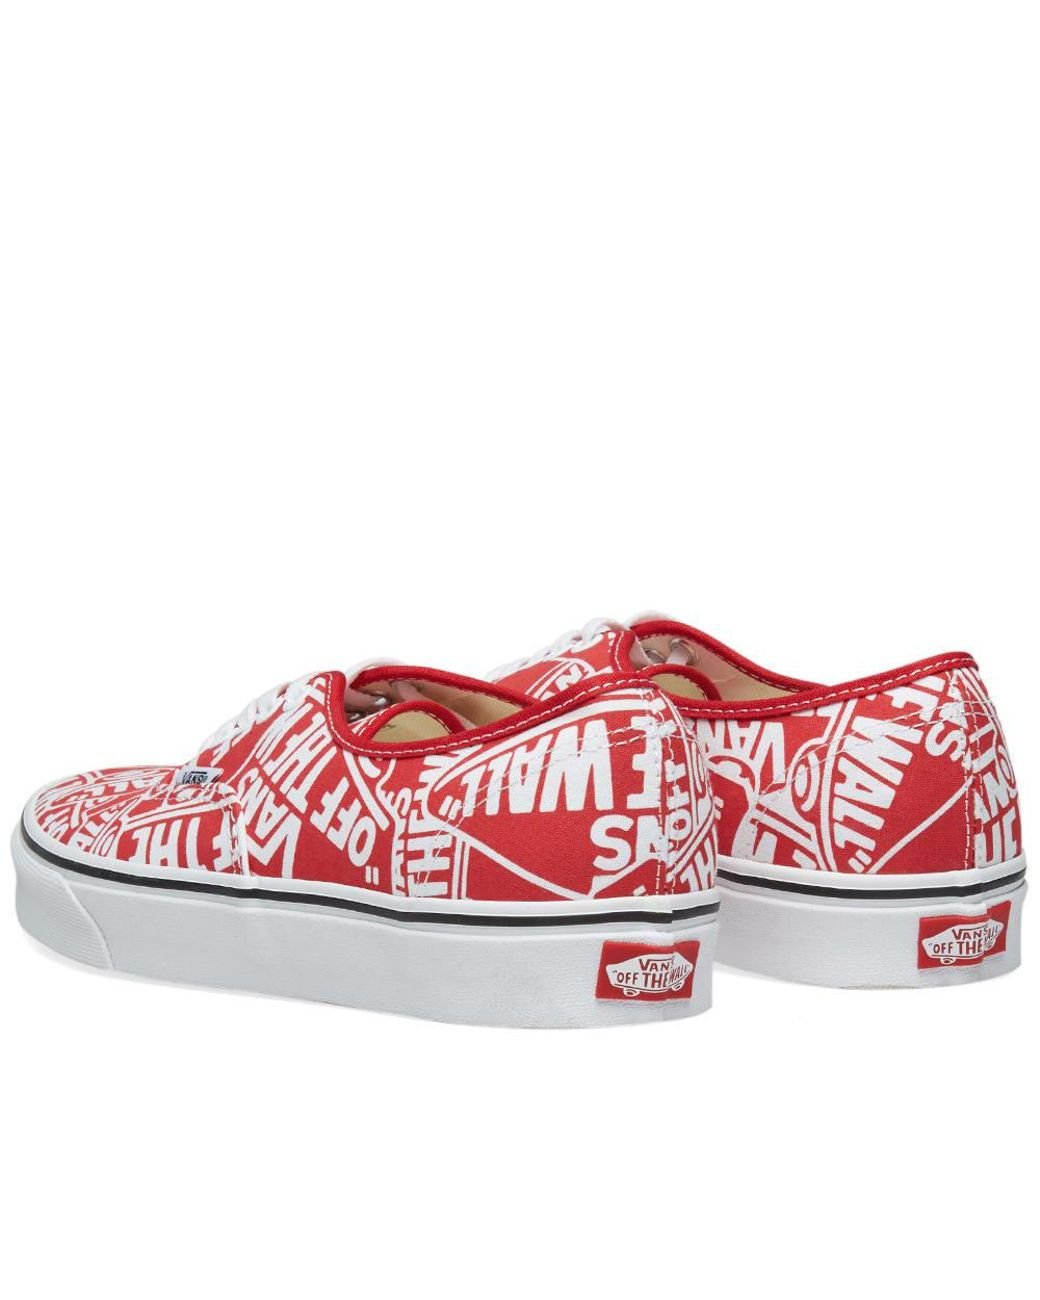 vans off the wall shoes cheap